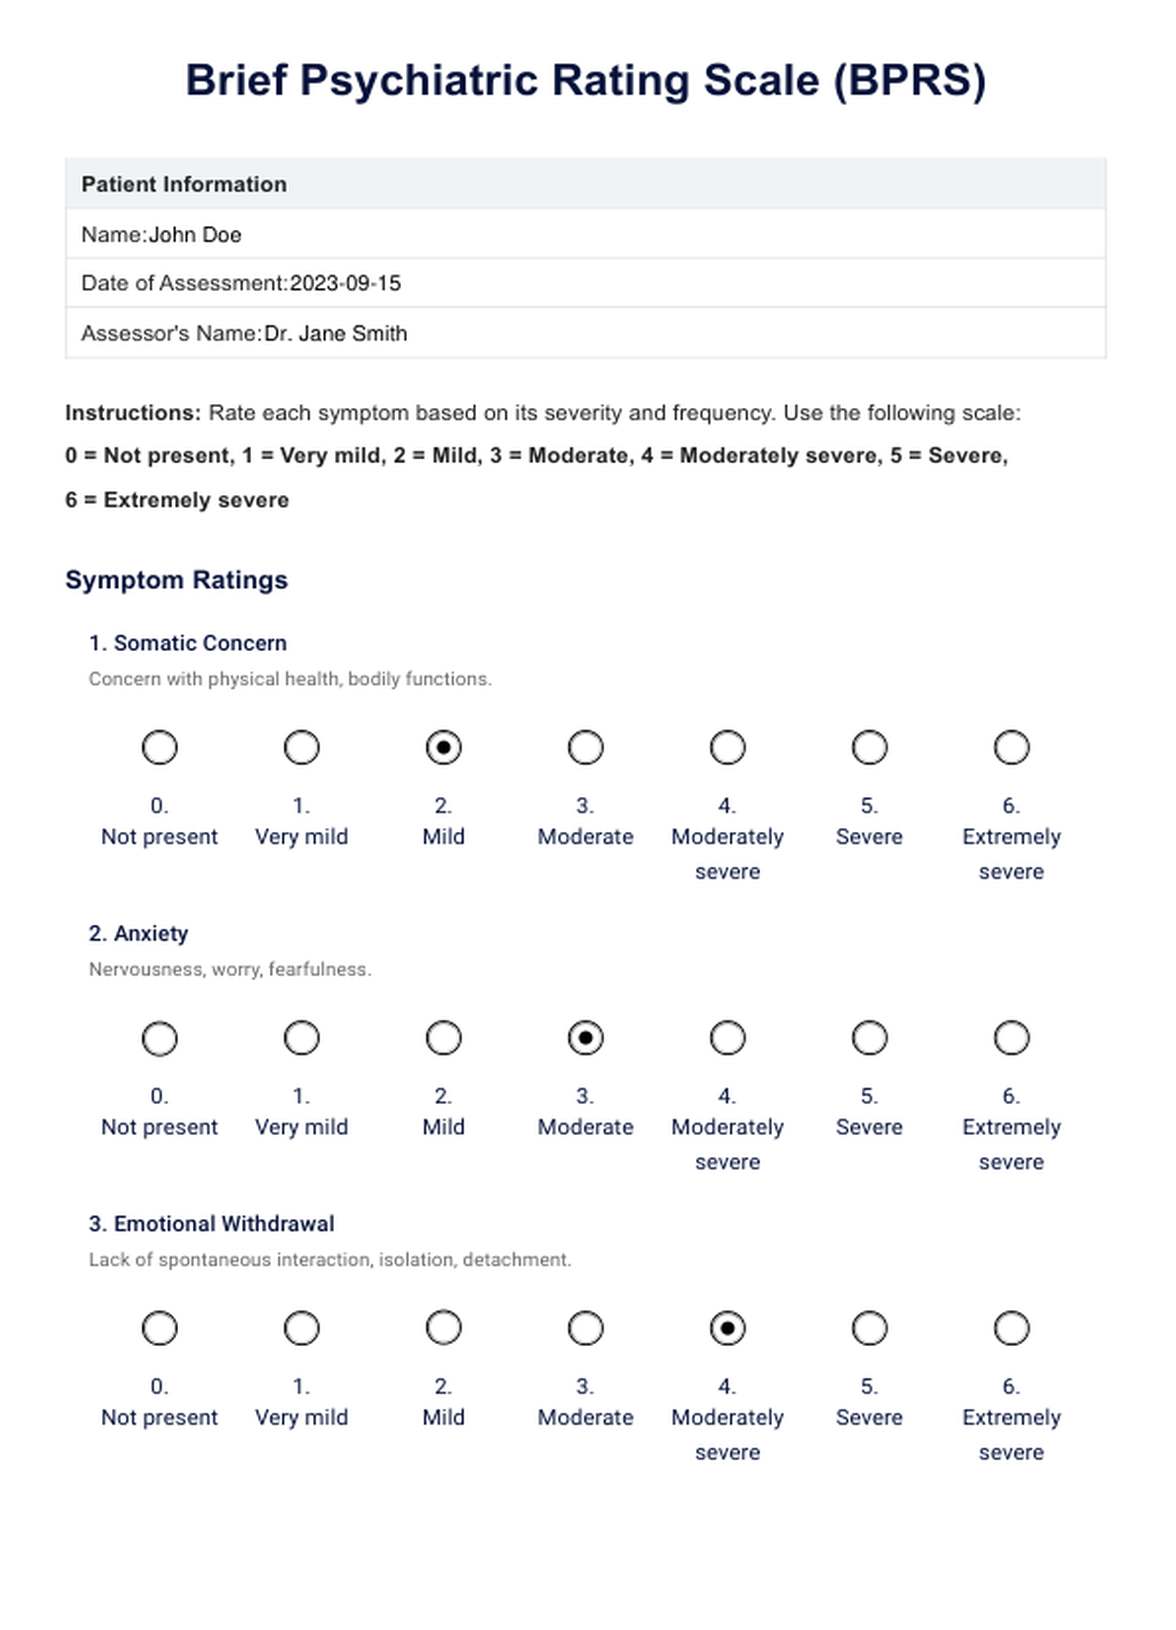 Brief Psychiatric Rating Scale PDF Example